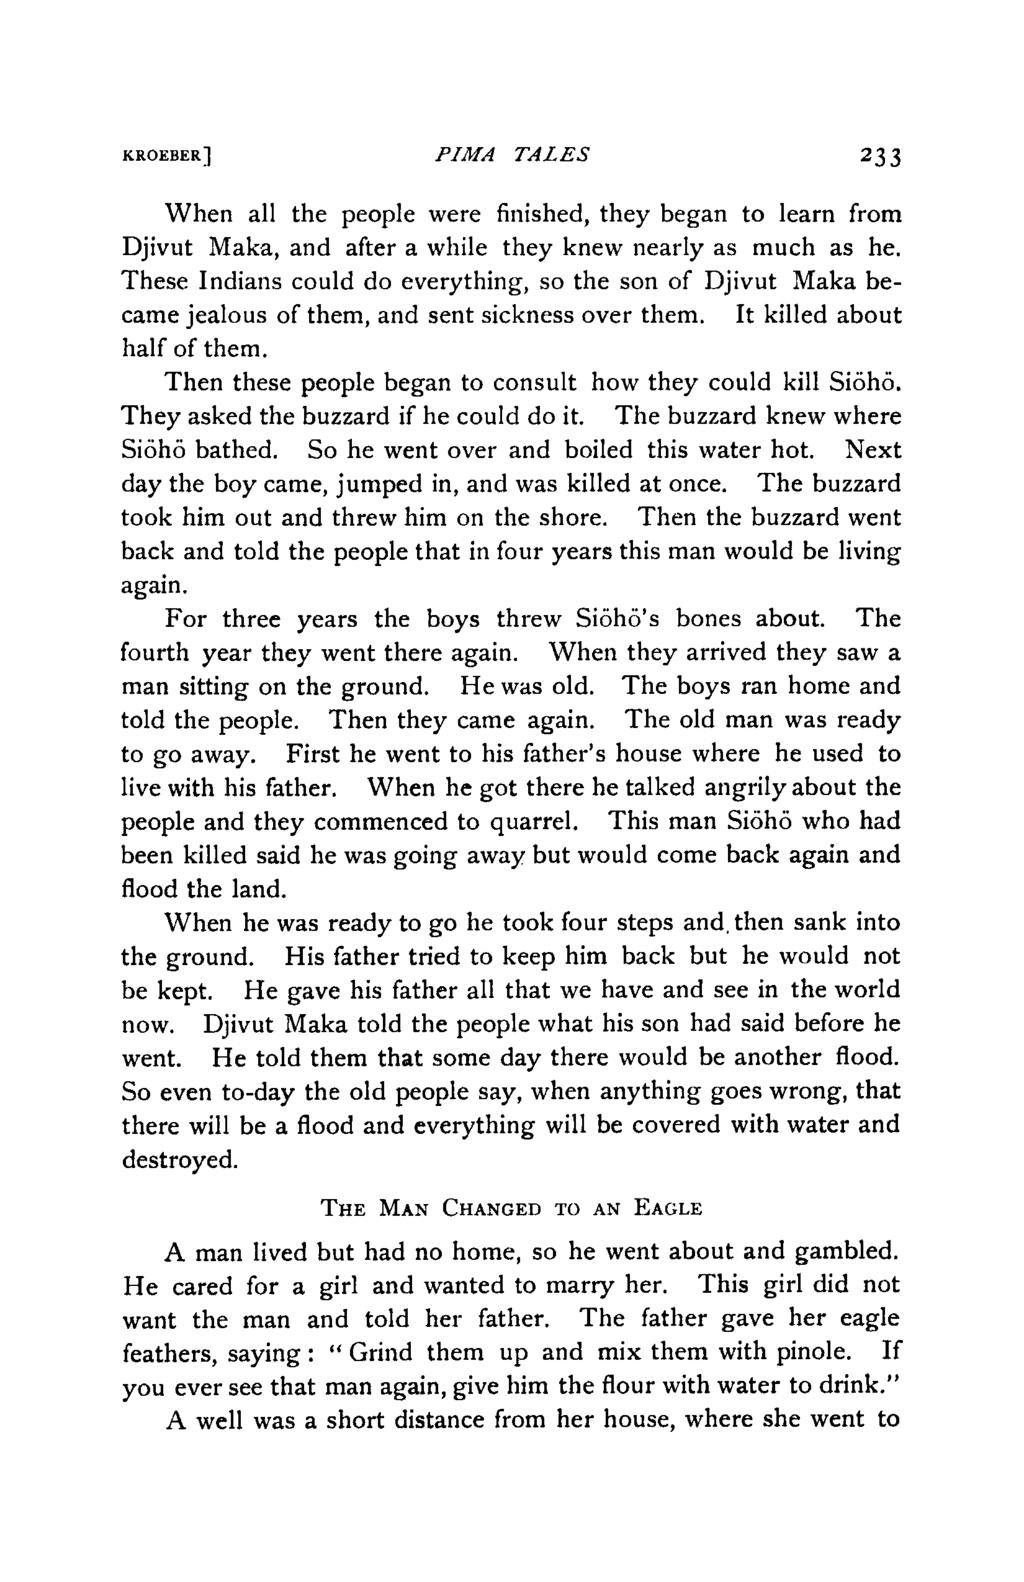 KROEBER] PZMA TALES 23 3 When all the people were finished, they began to learn from Djivut Maka, and after a while they knew nearly as much as he.